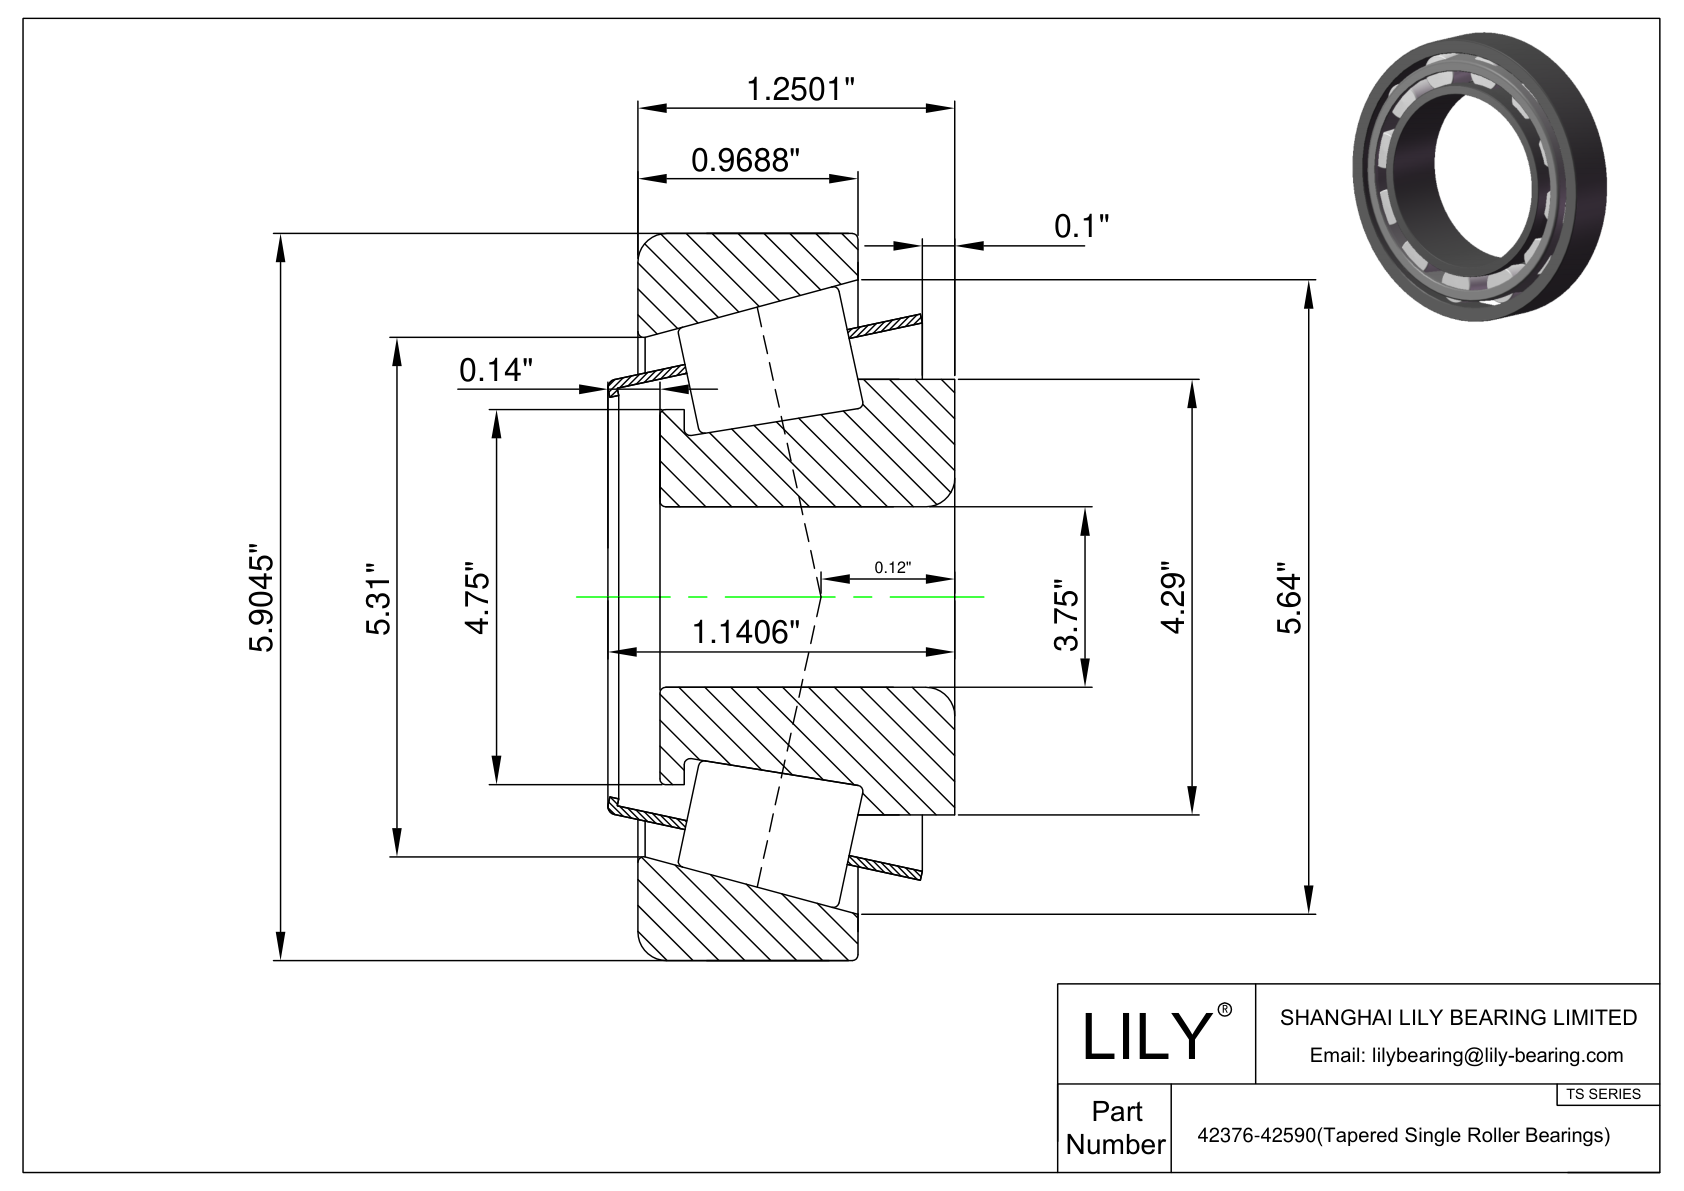 42376-42590 TS (Tapered Single Roller Bearings) (Imperial) cad drawing